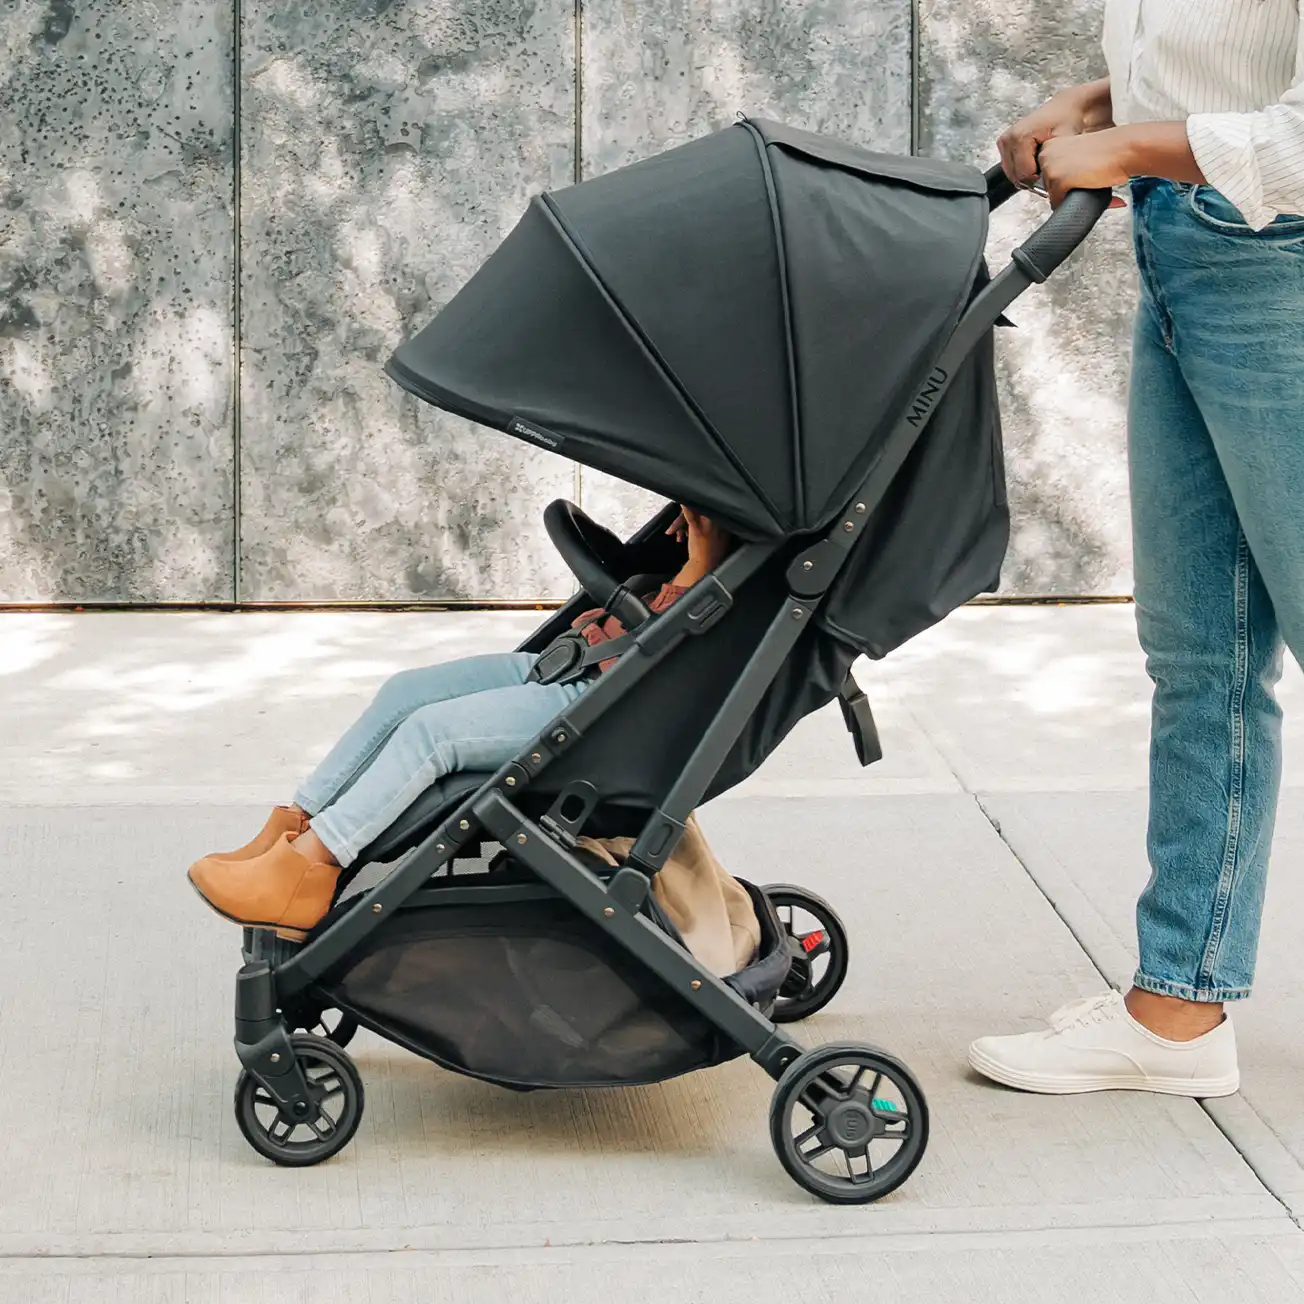 A woman pushes her toddler sitting comfortably in the Minu V2 thanks to its zip-out extendable UPF 50+ canopy